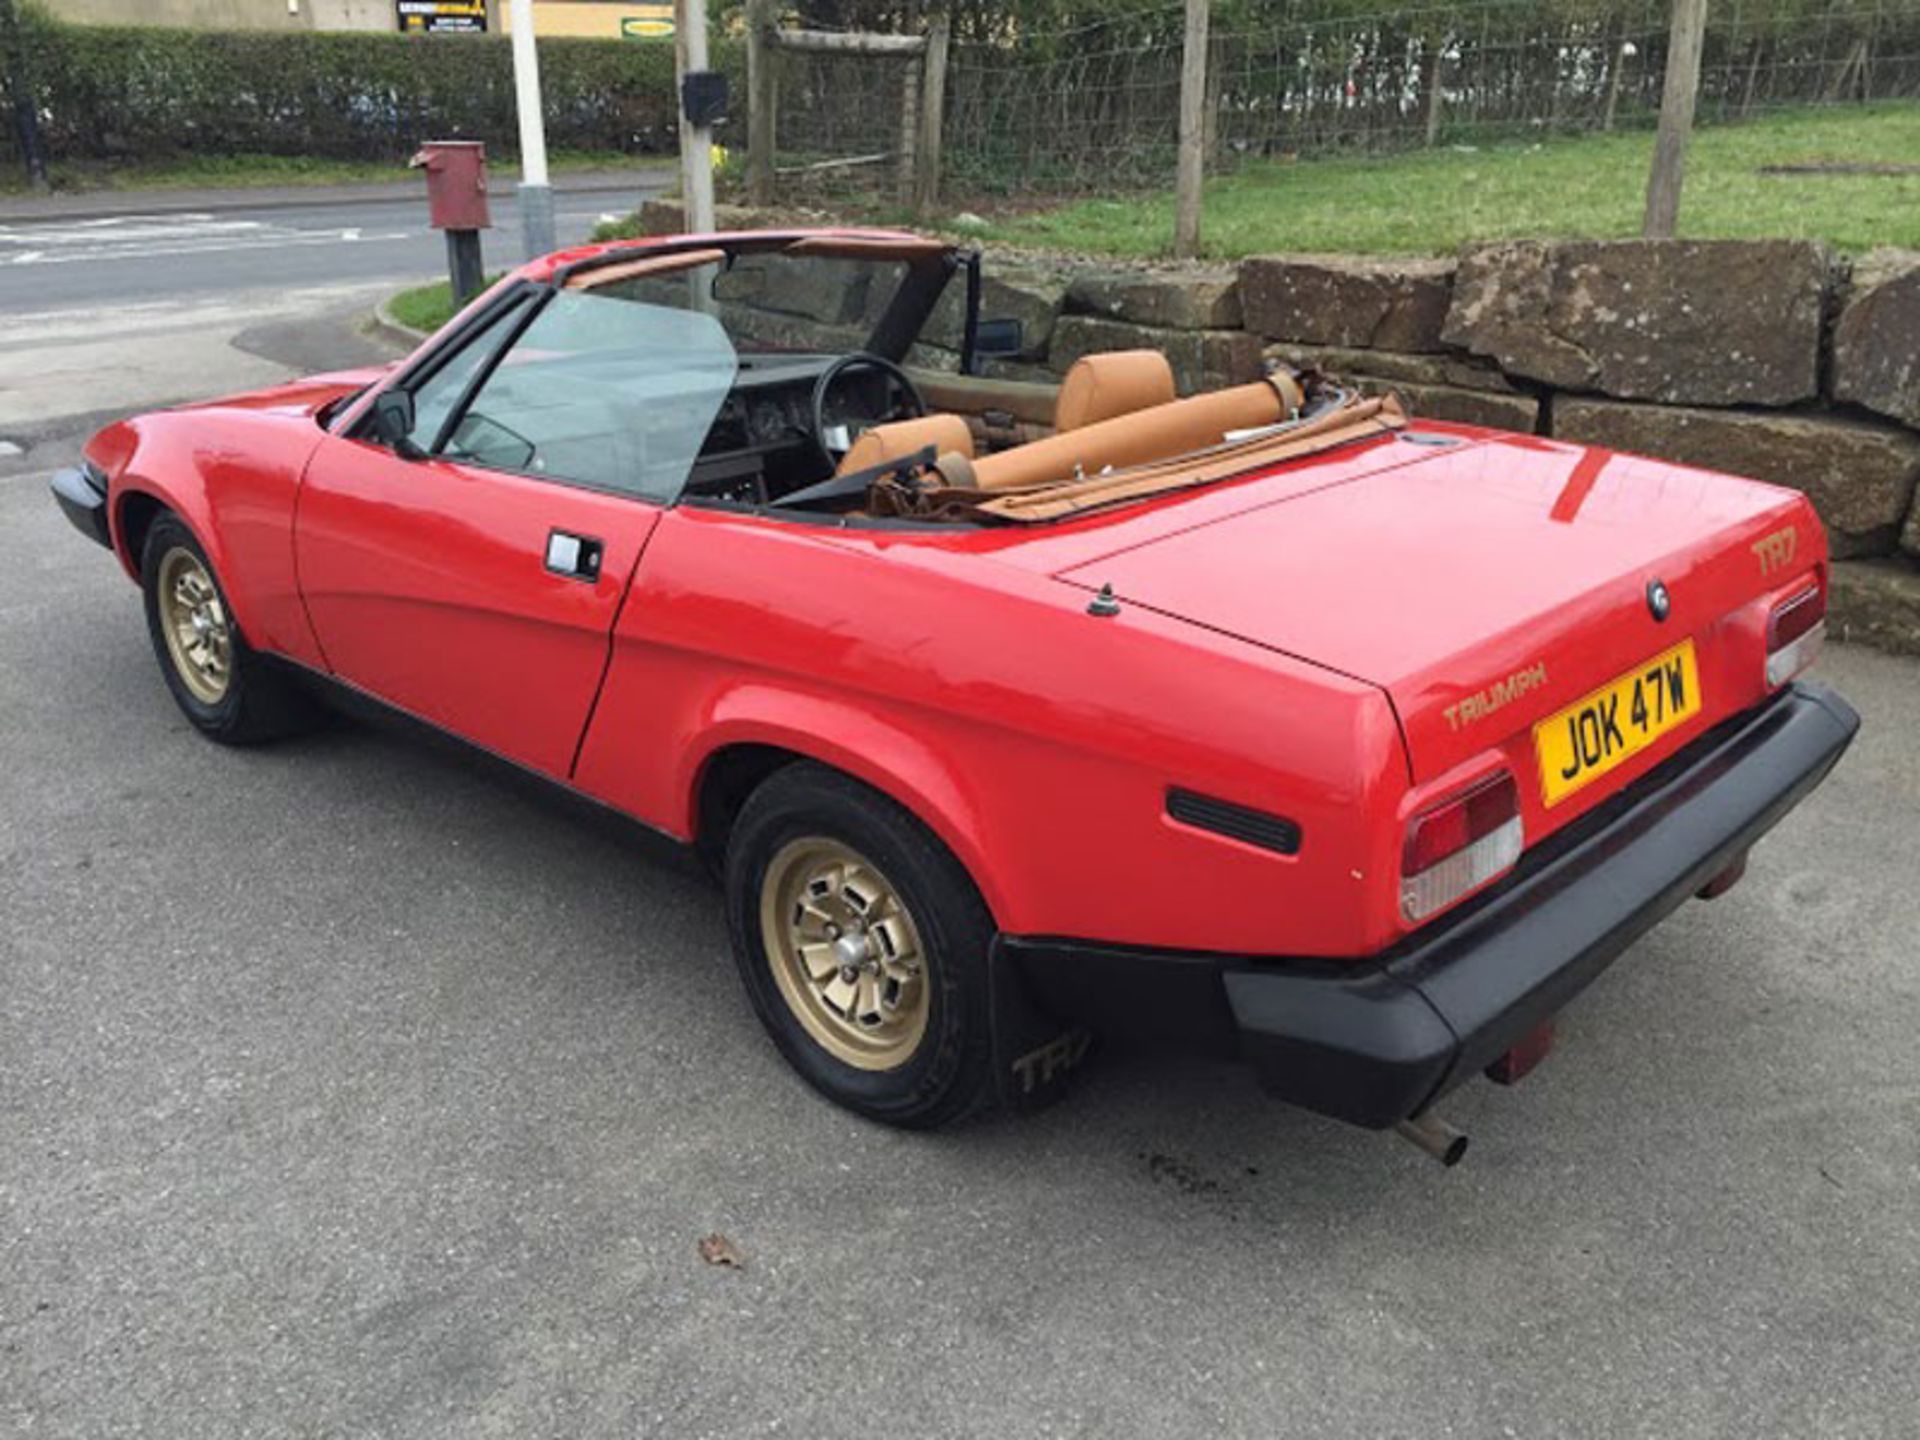 - Offered from long-term Triumph enthusiast ownership

- 87,000 recorded miles, MOT'd into April - Image 2 of 5